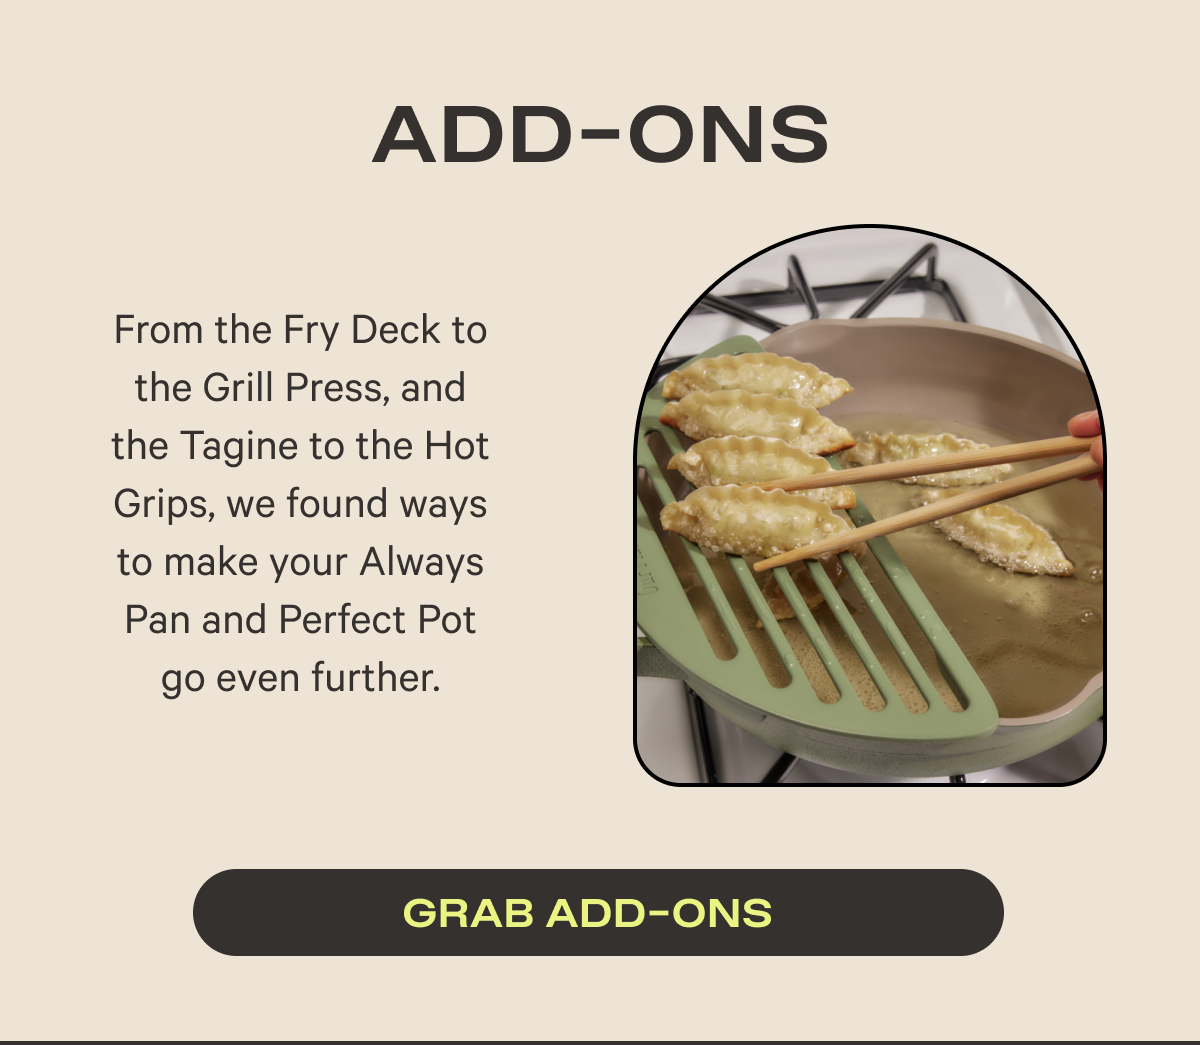 Add ons | From the Fry Deck to the Grill Press, and the Tagine to the Hot Grips, we found ways to make your Always Pan and Perfect Pot go even further.